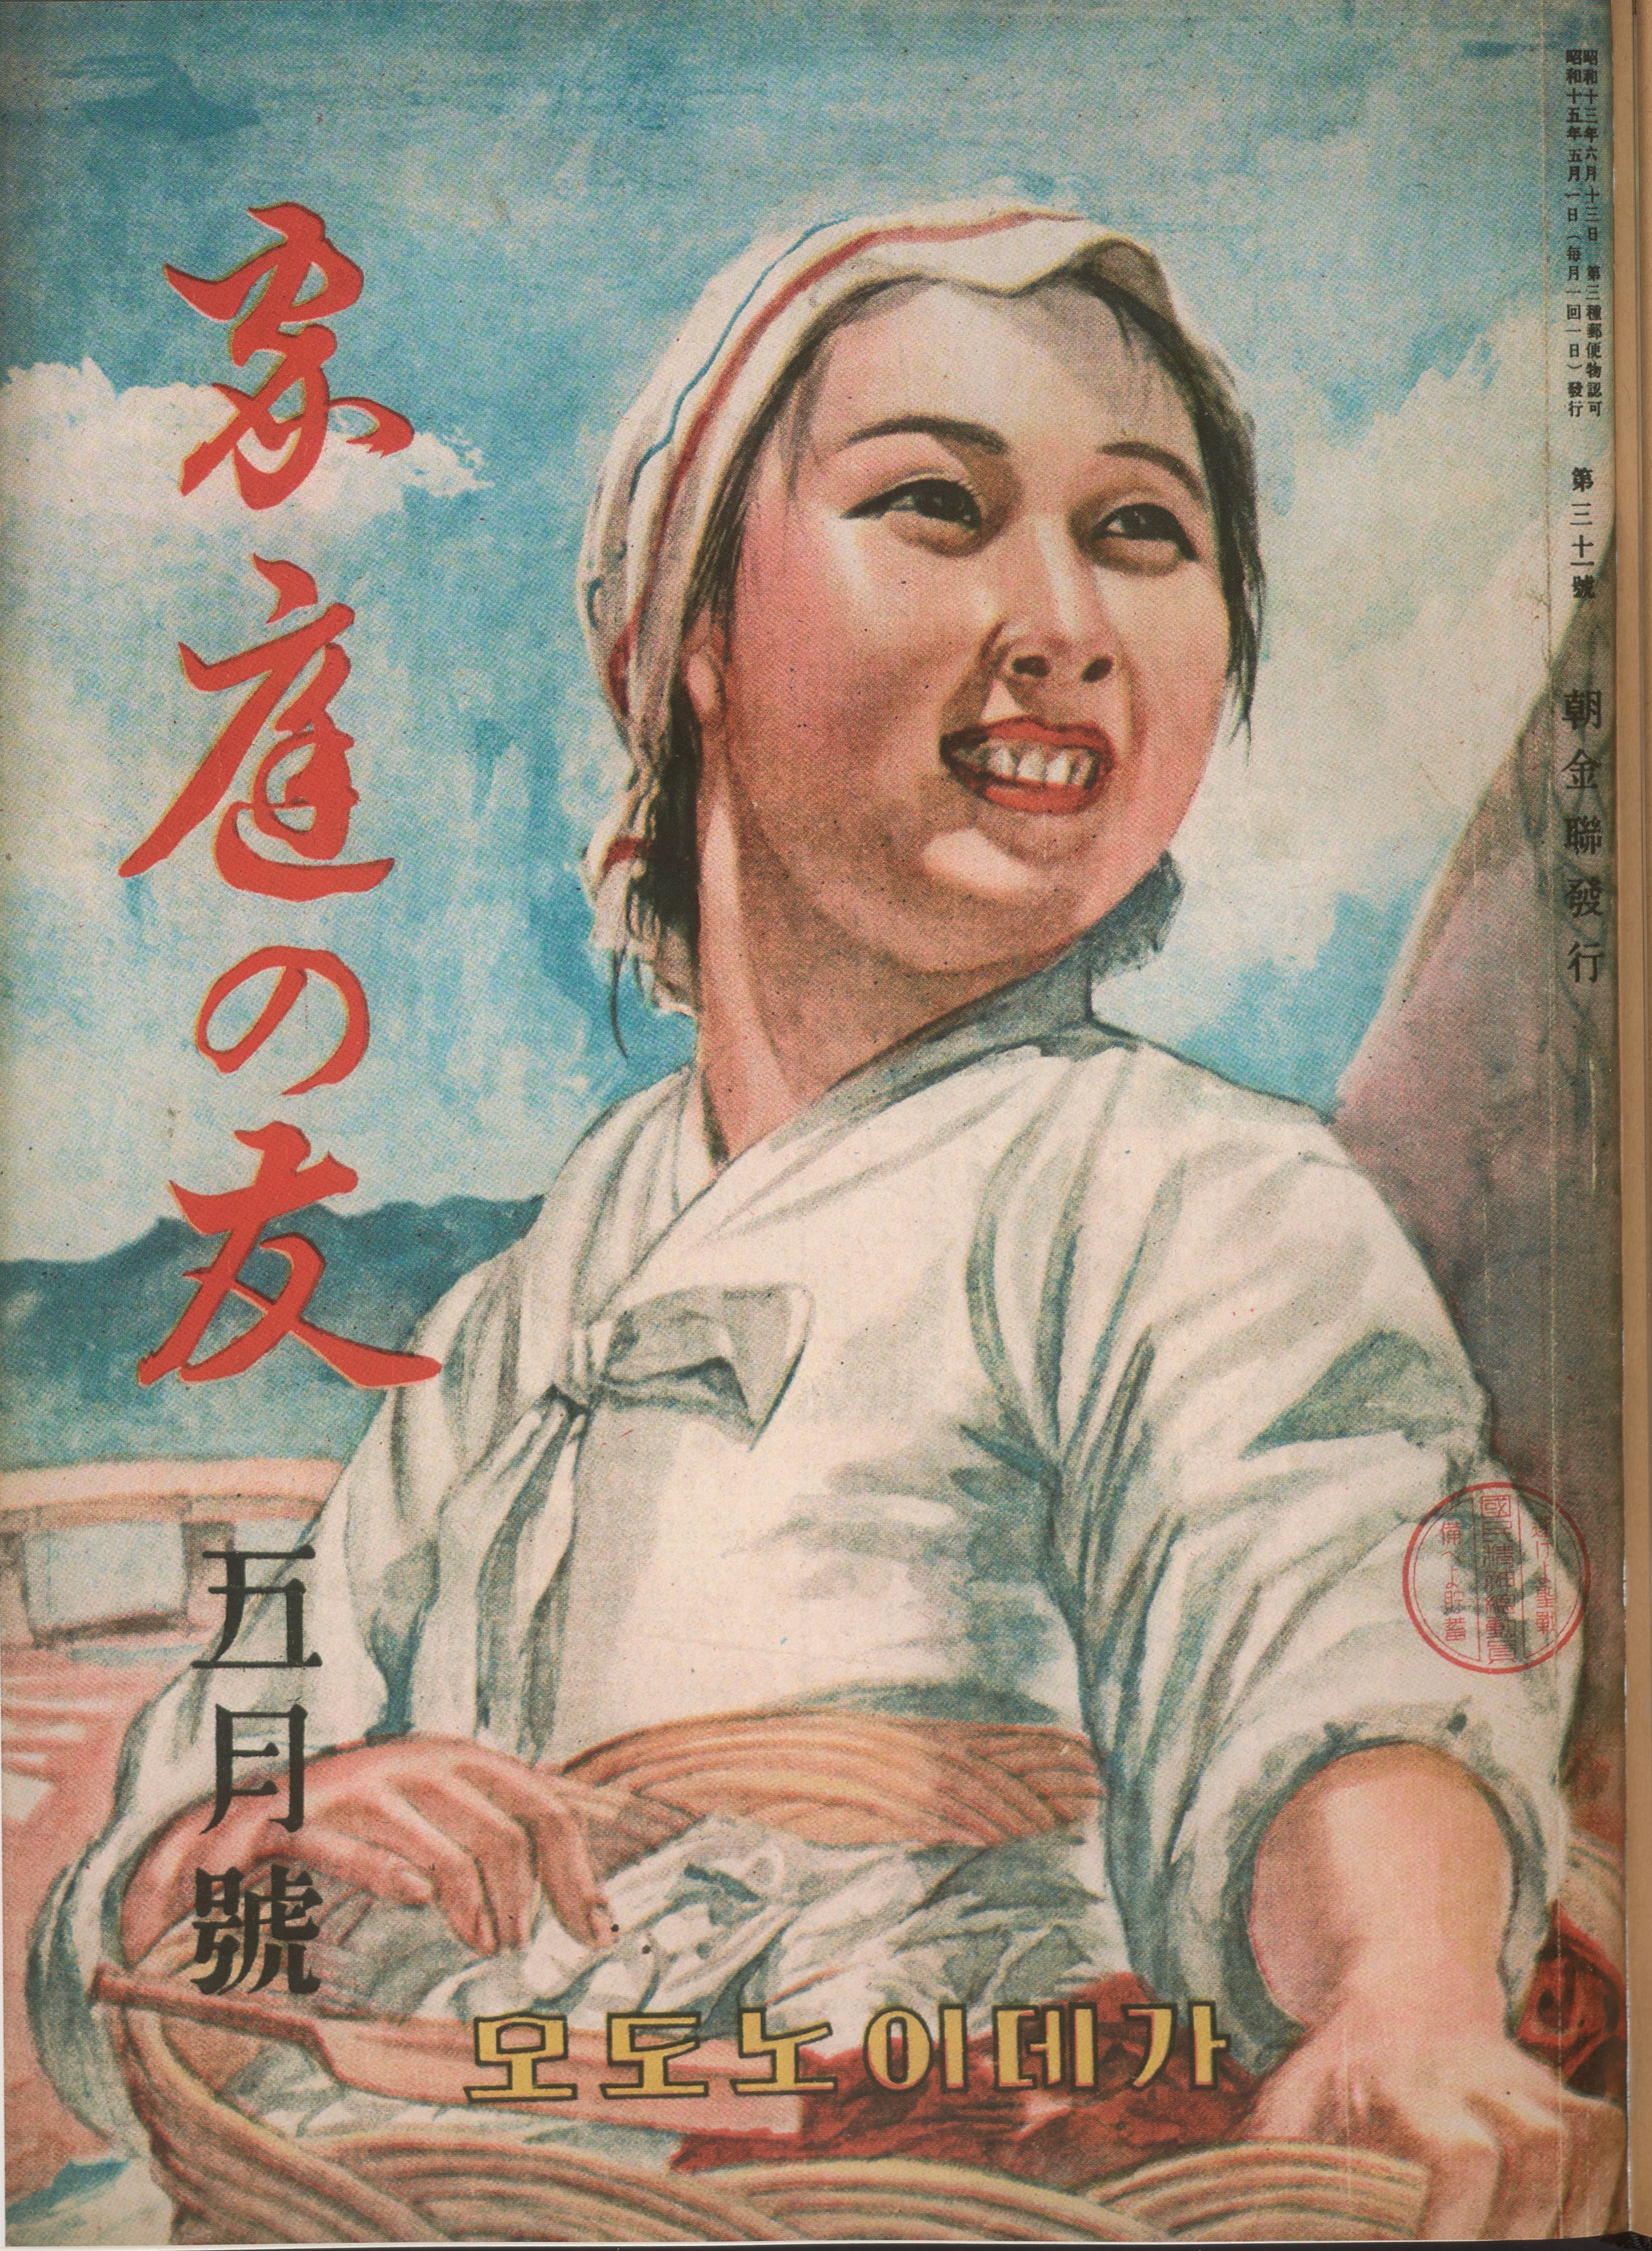 Book cover showing a person wearing a bonnet and holding a basket. Text on left and bottom in Korean.